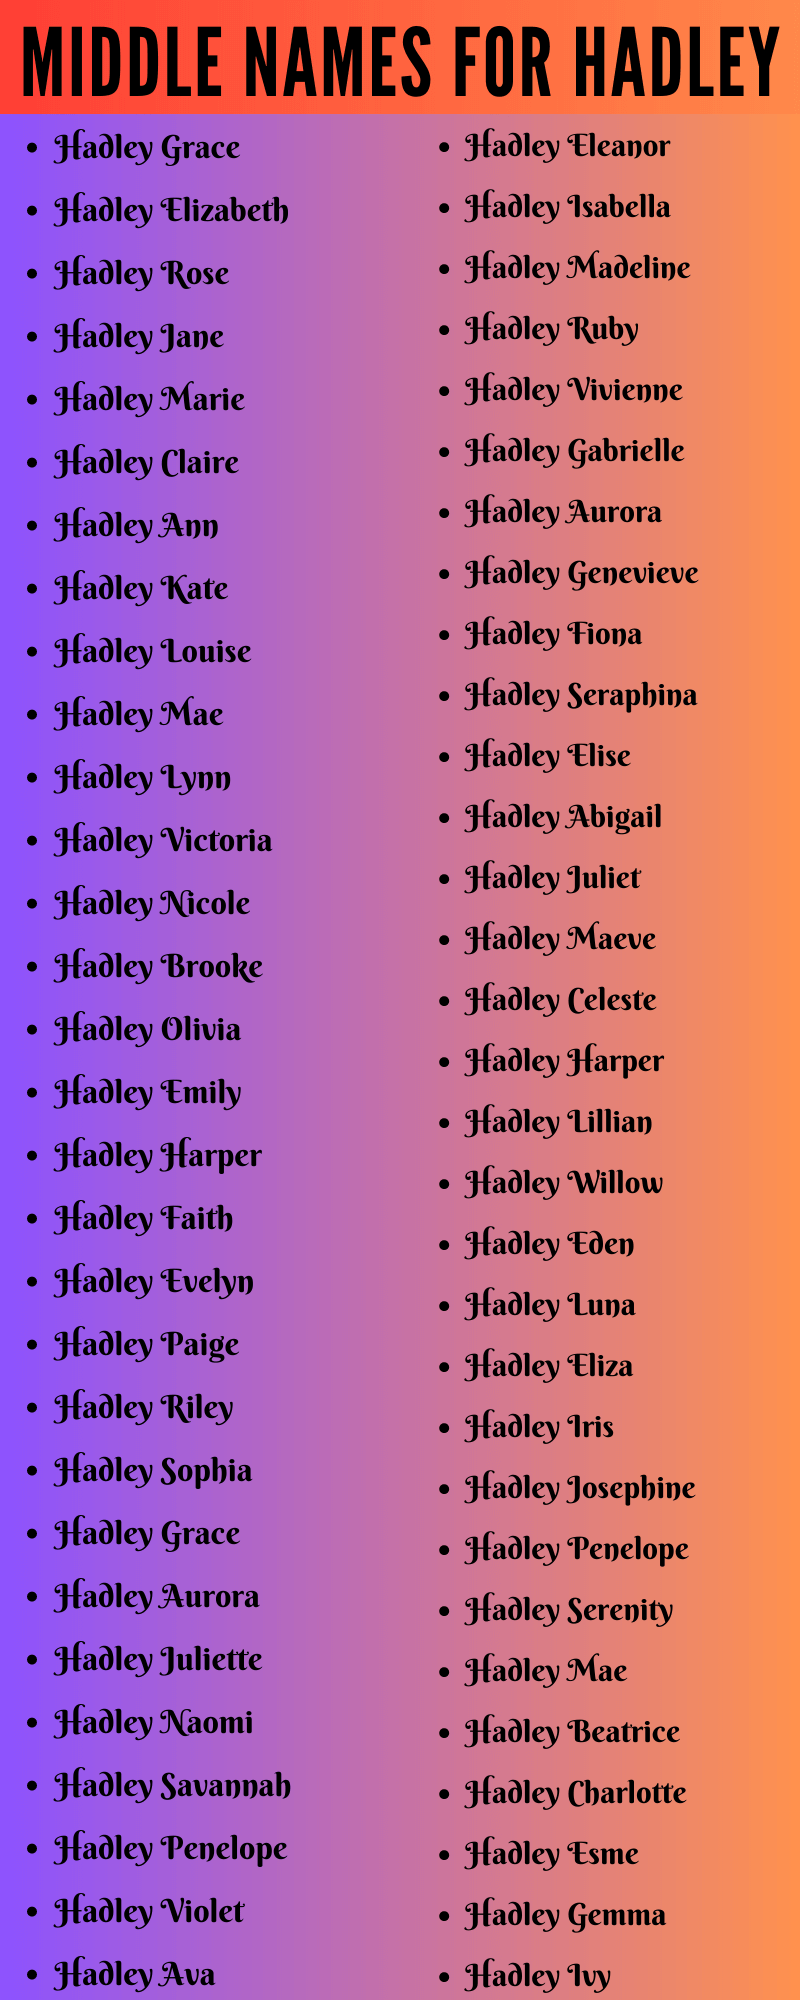 400 Cute Middle Names For Hadley